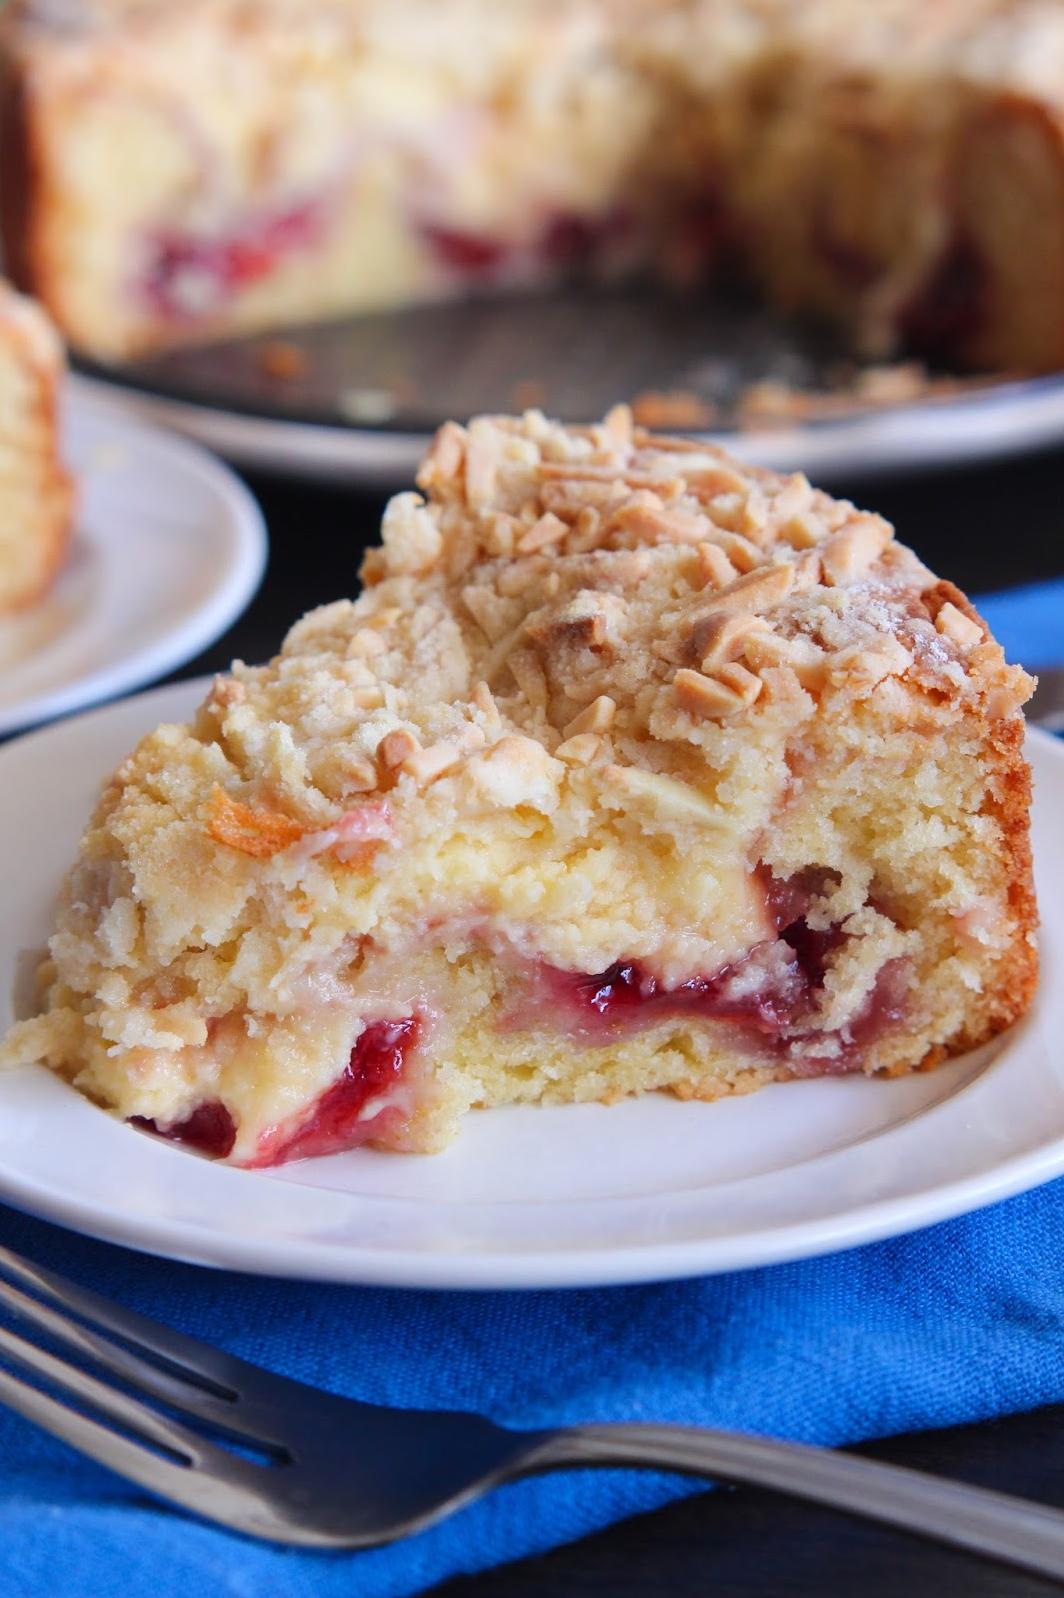  Super moist and absolutely delightful, this Cherry Cream Coffee Cake is worth every calorie.